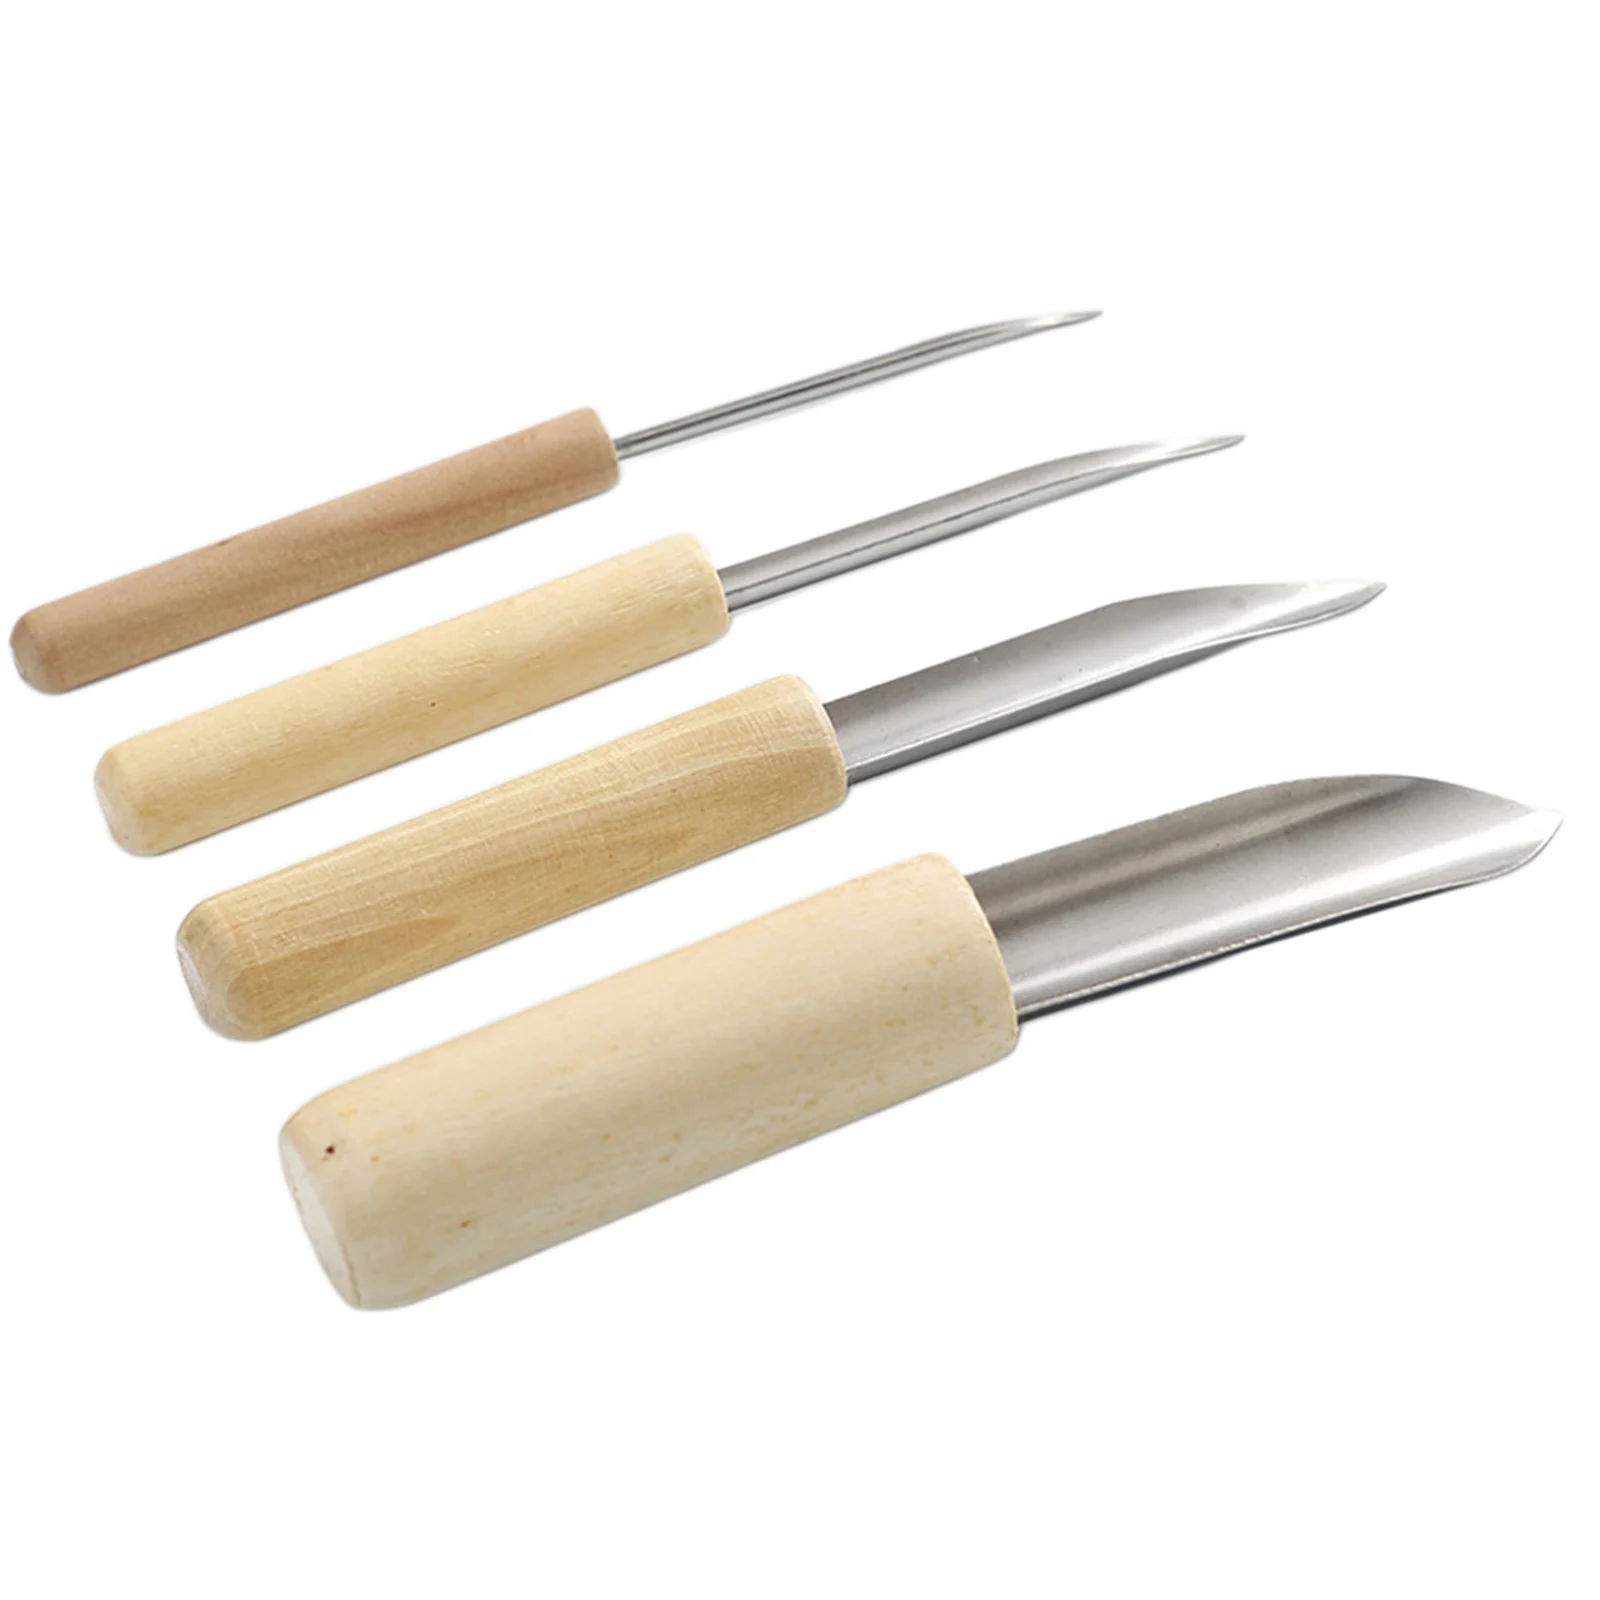 4x Pro Clay Hole Cutters Punch Pottery Sculpture Wooden Punching Polymer Modeling Cutting Scraping Marking Drilling Artist Tool